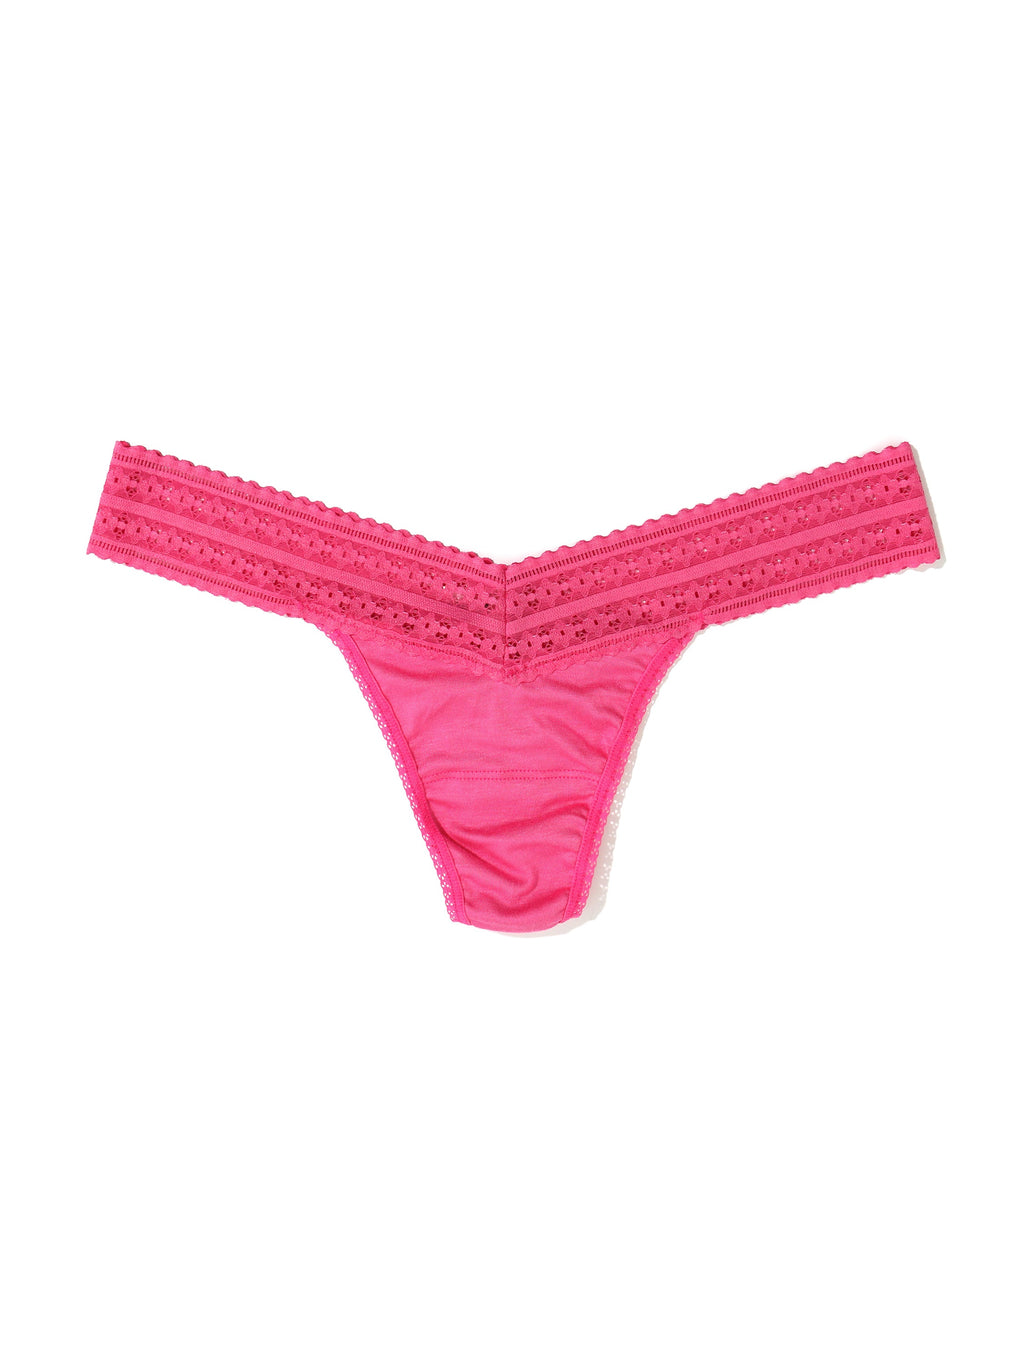 DreamEase™ Low Rise Thong Kiss From A Rose Pink | Hanky Panky